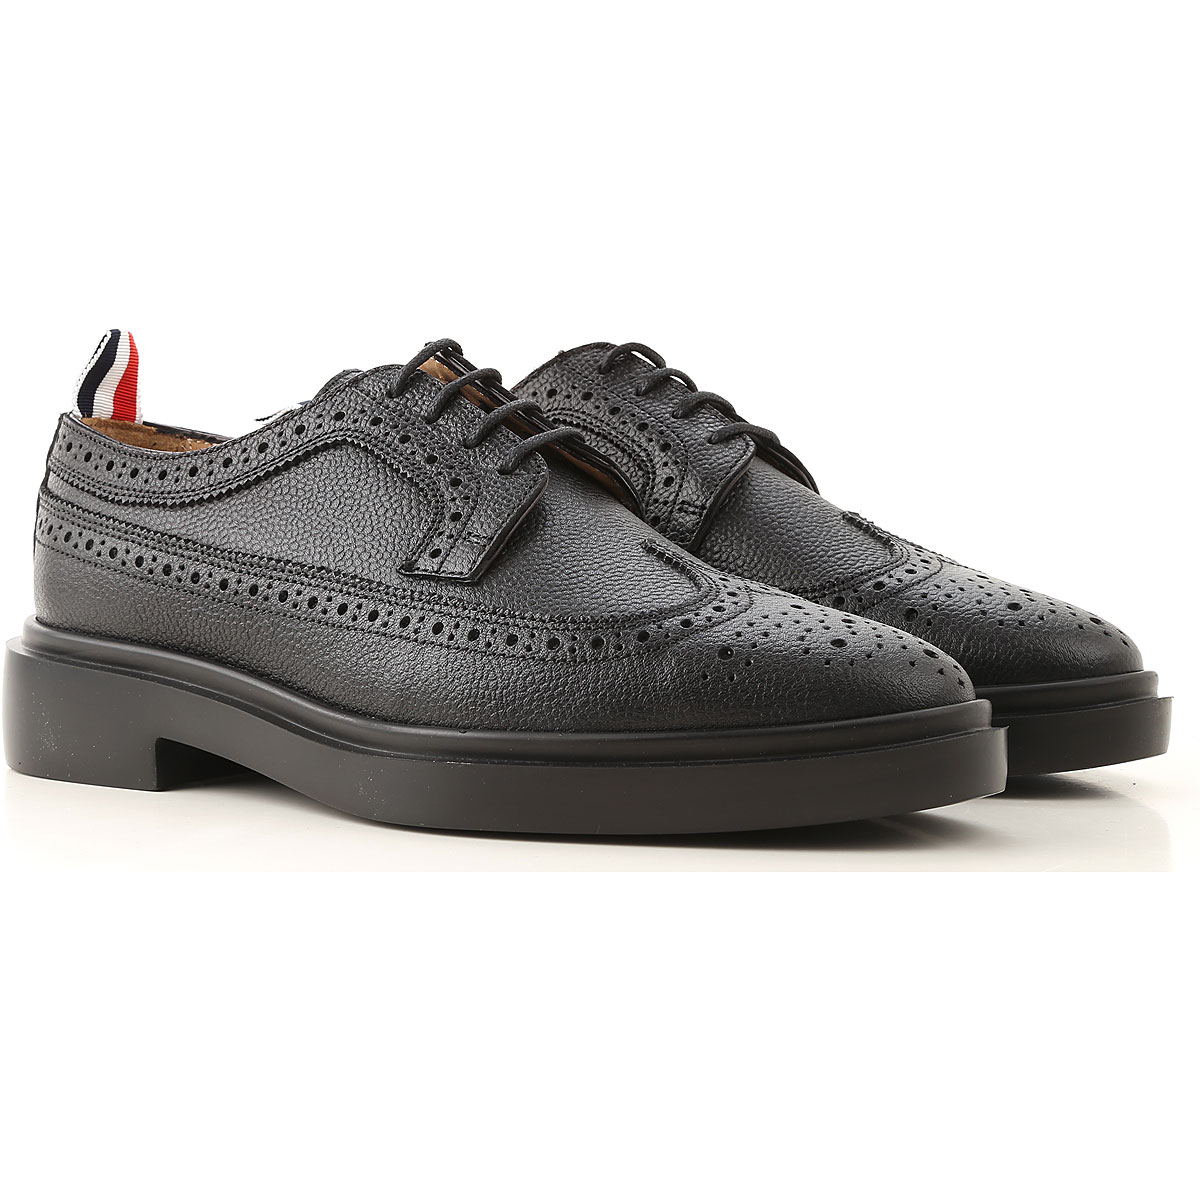 Womens Shoes THOM BROWNE, Style code: ff0002g-00198-001